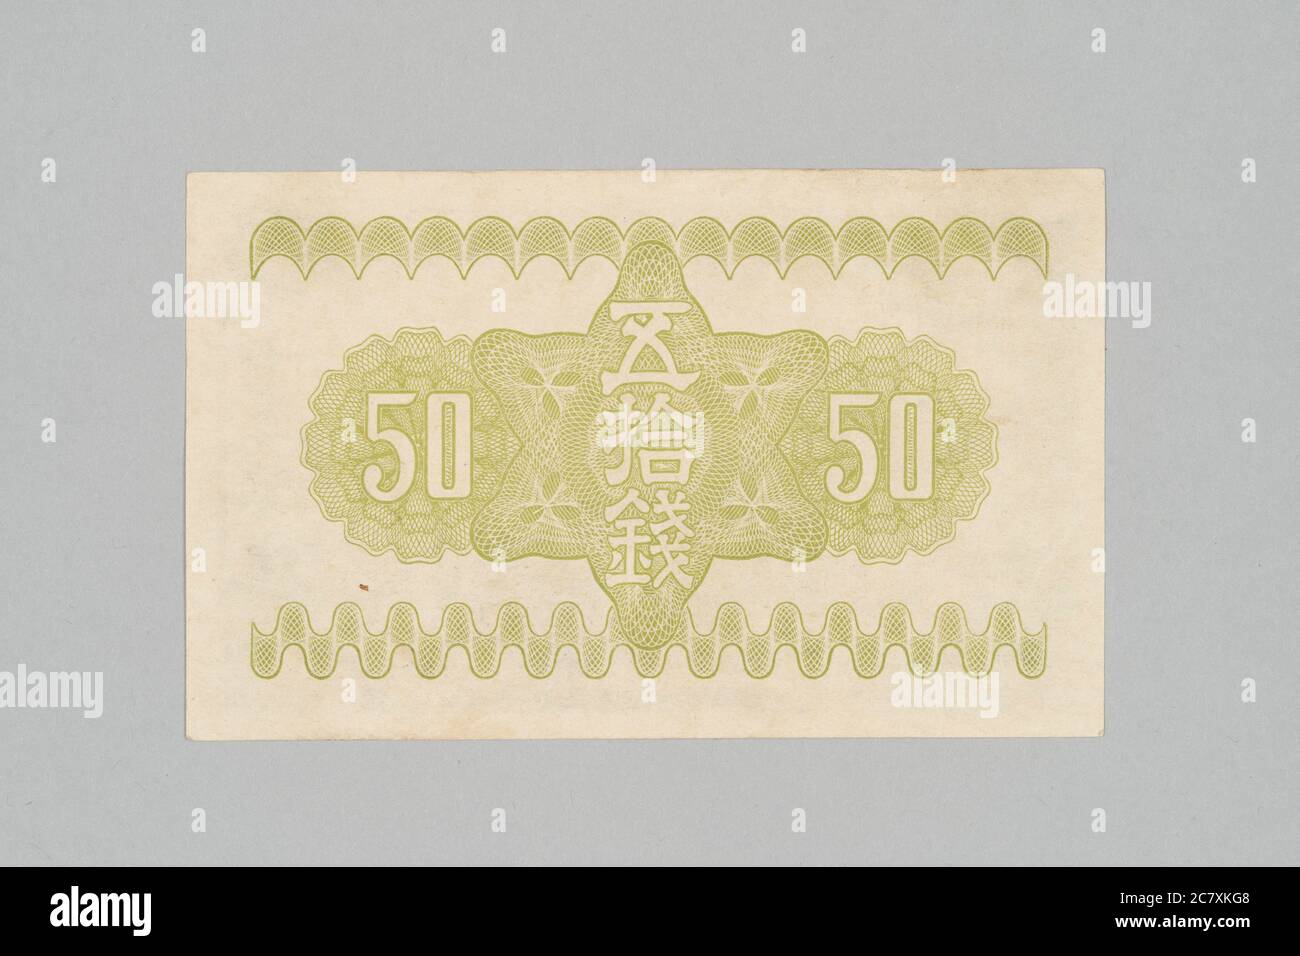 Backside of Japanese banknote 50 sen, Mt. Fuji design, Private Collection Stock Photo